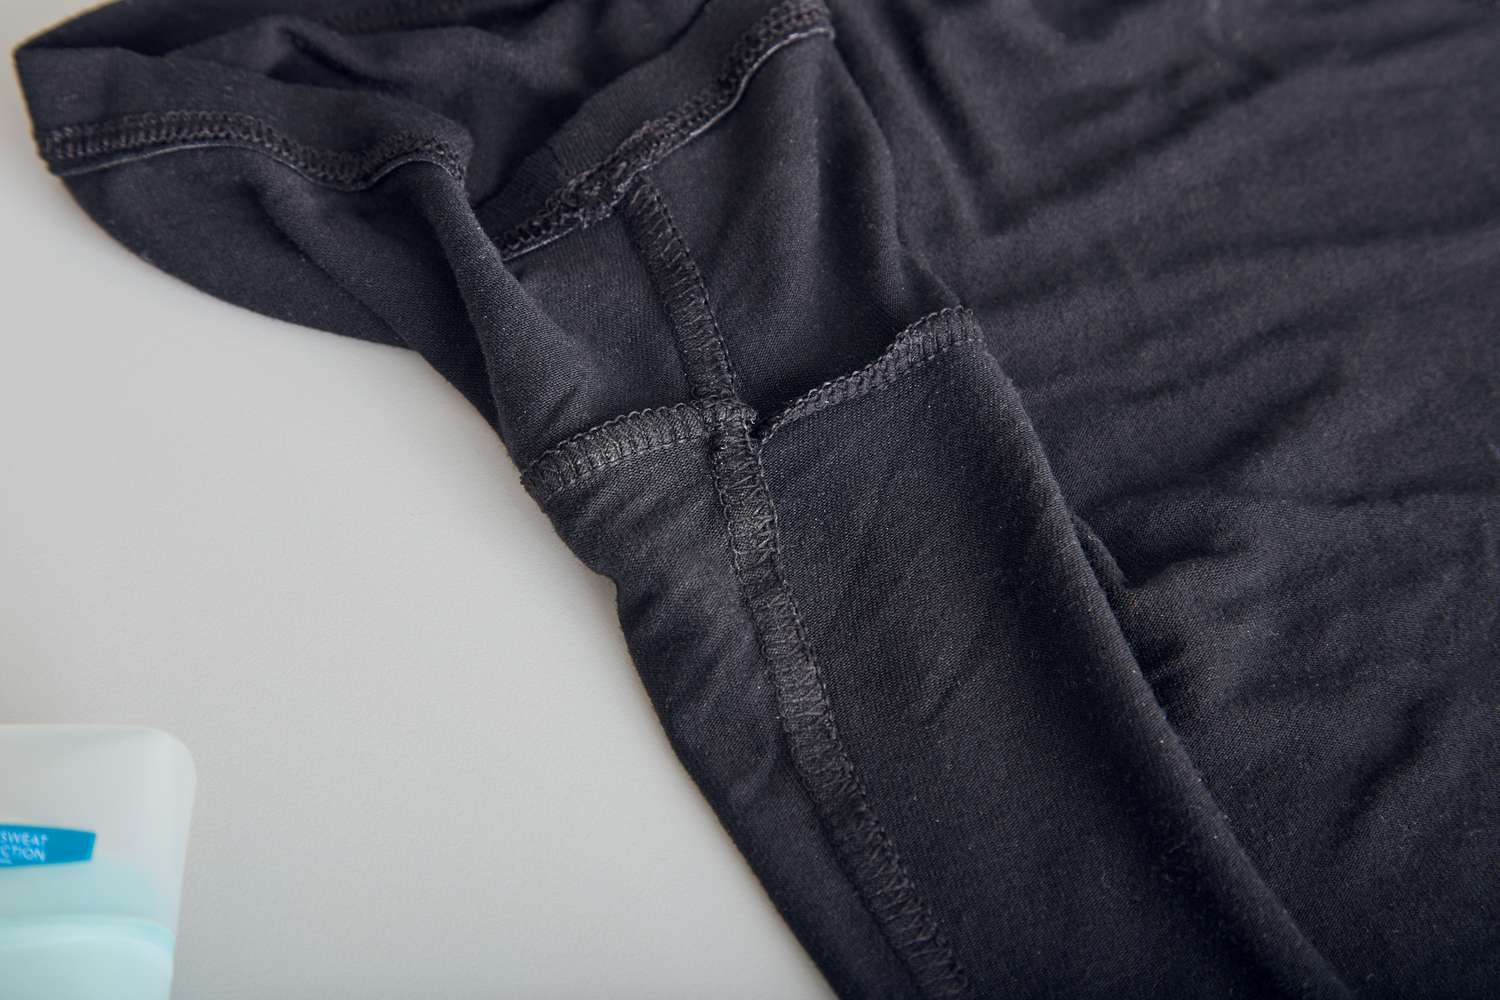 Closeup of the underarm of an inside out black T-shirt